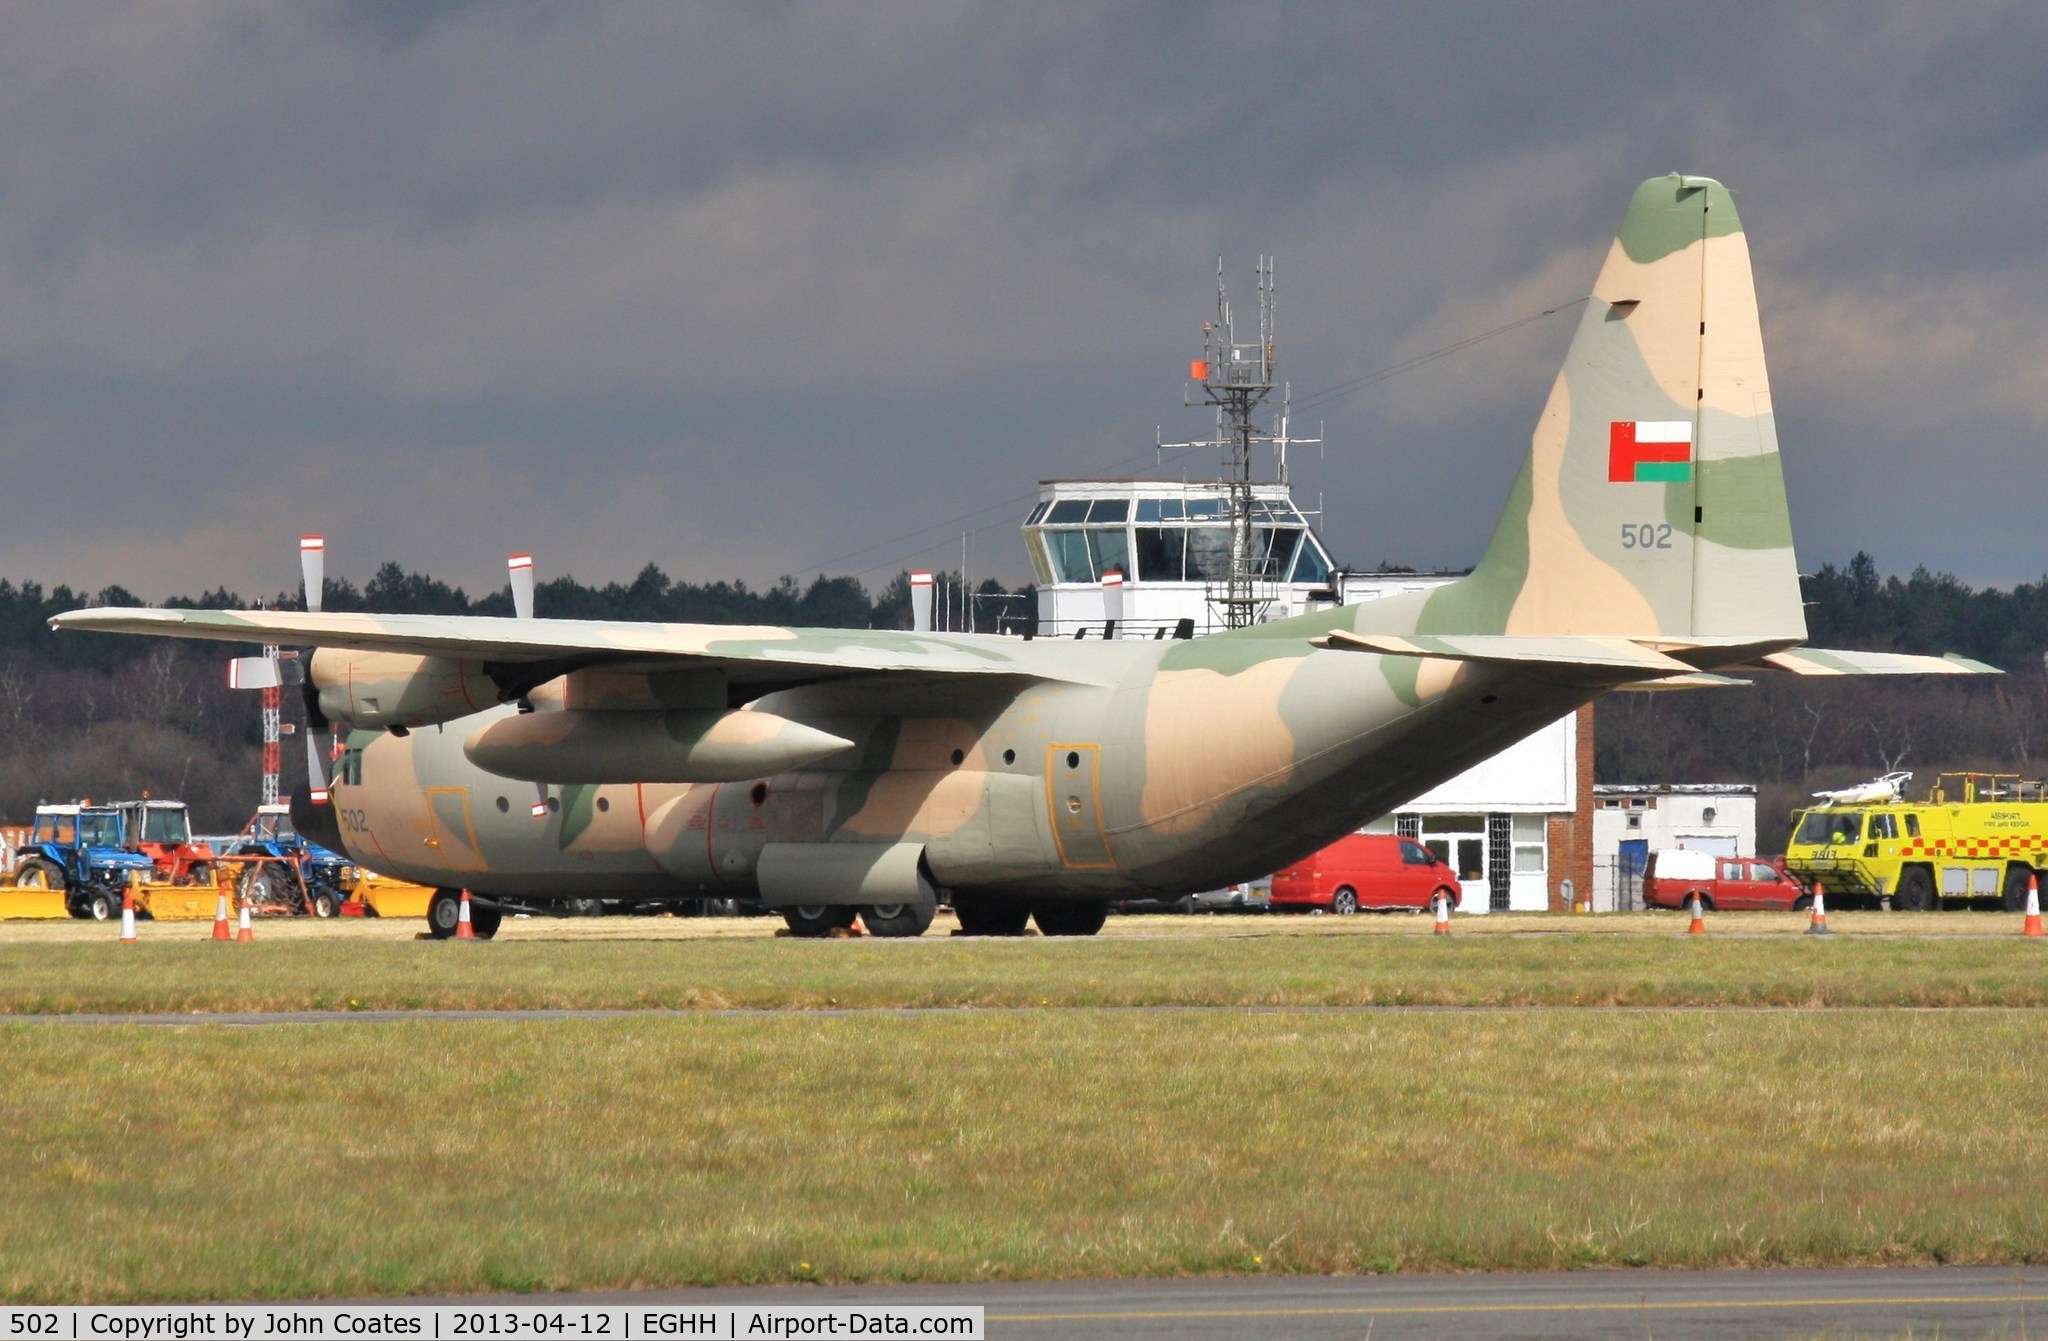 502, 1981 Lockheed C-130H Hercules C/N 4916, Arabic serials now replaced by easy to read English numbers